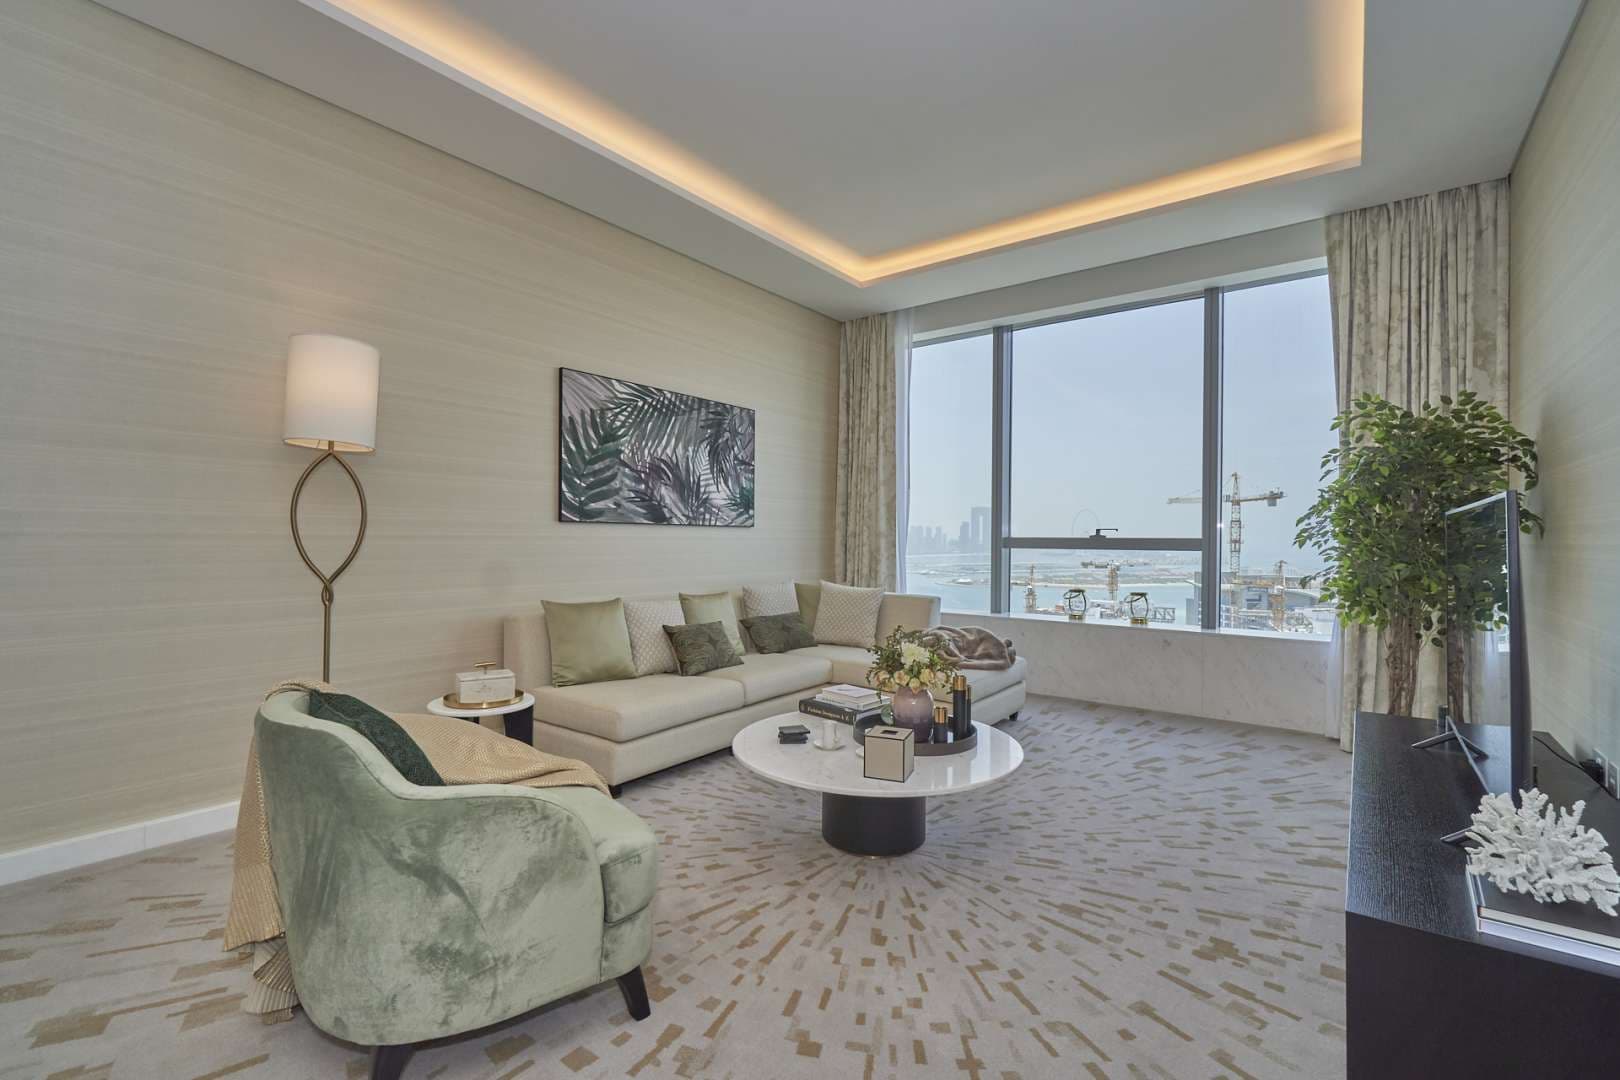 1 Bedroom Apartment For Sale The Palm Tower Lp07384 58f51c32f4bc8c0.jpg